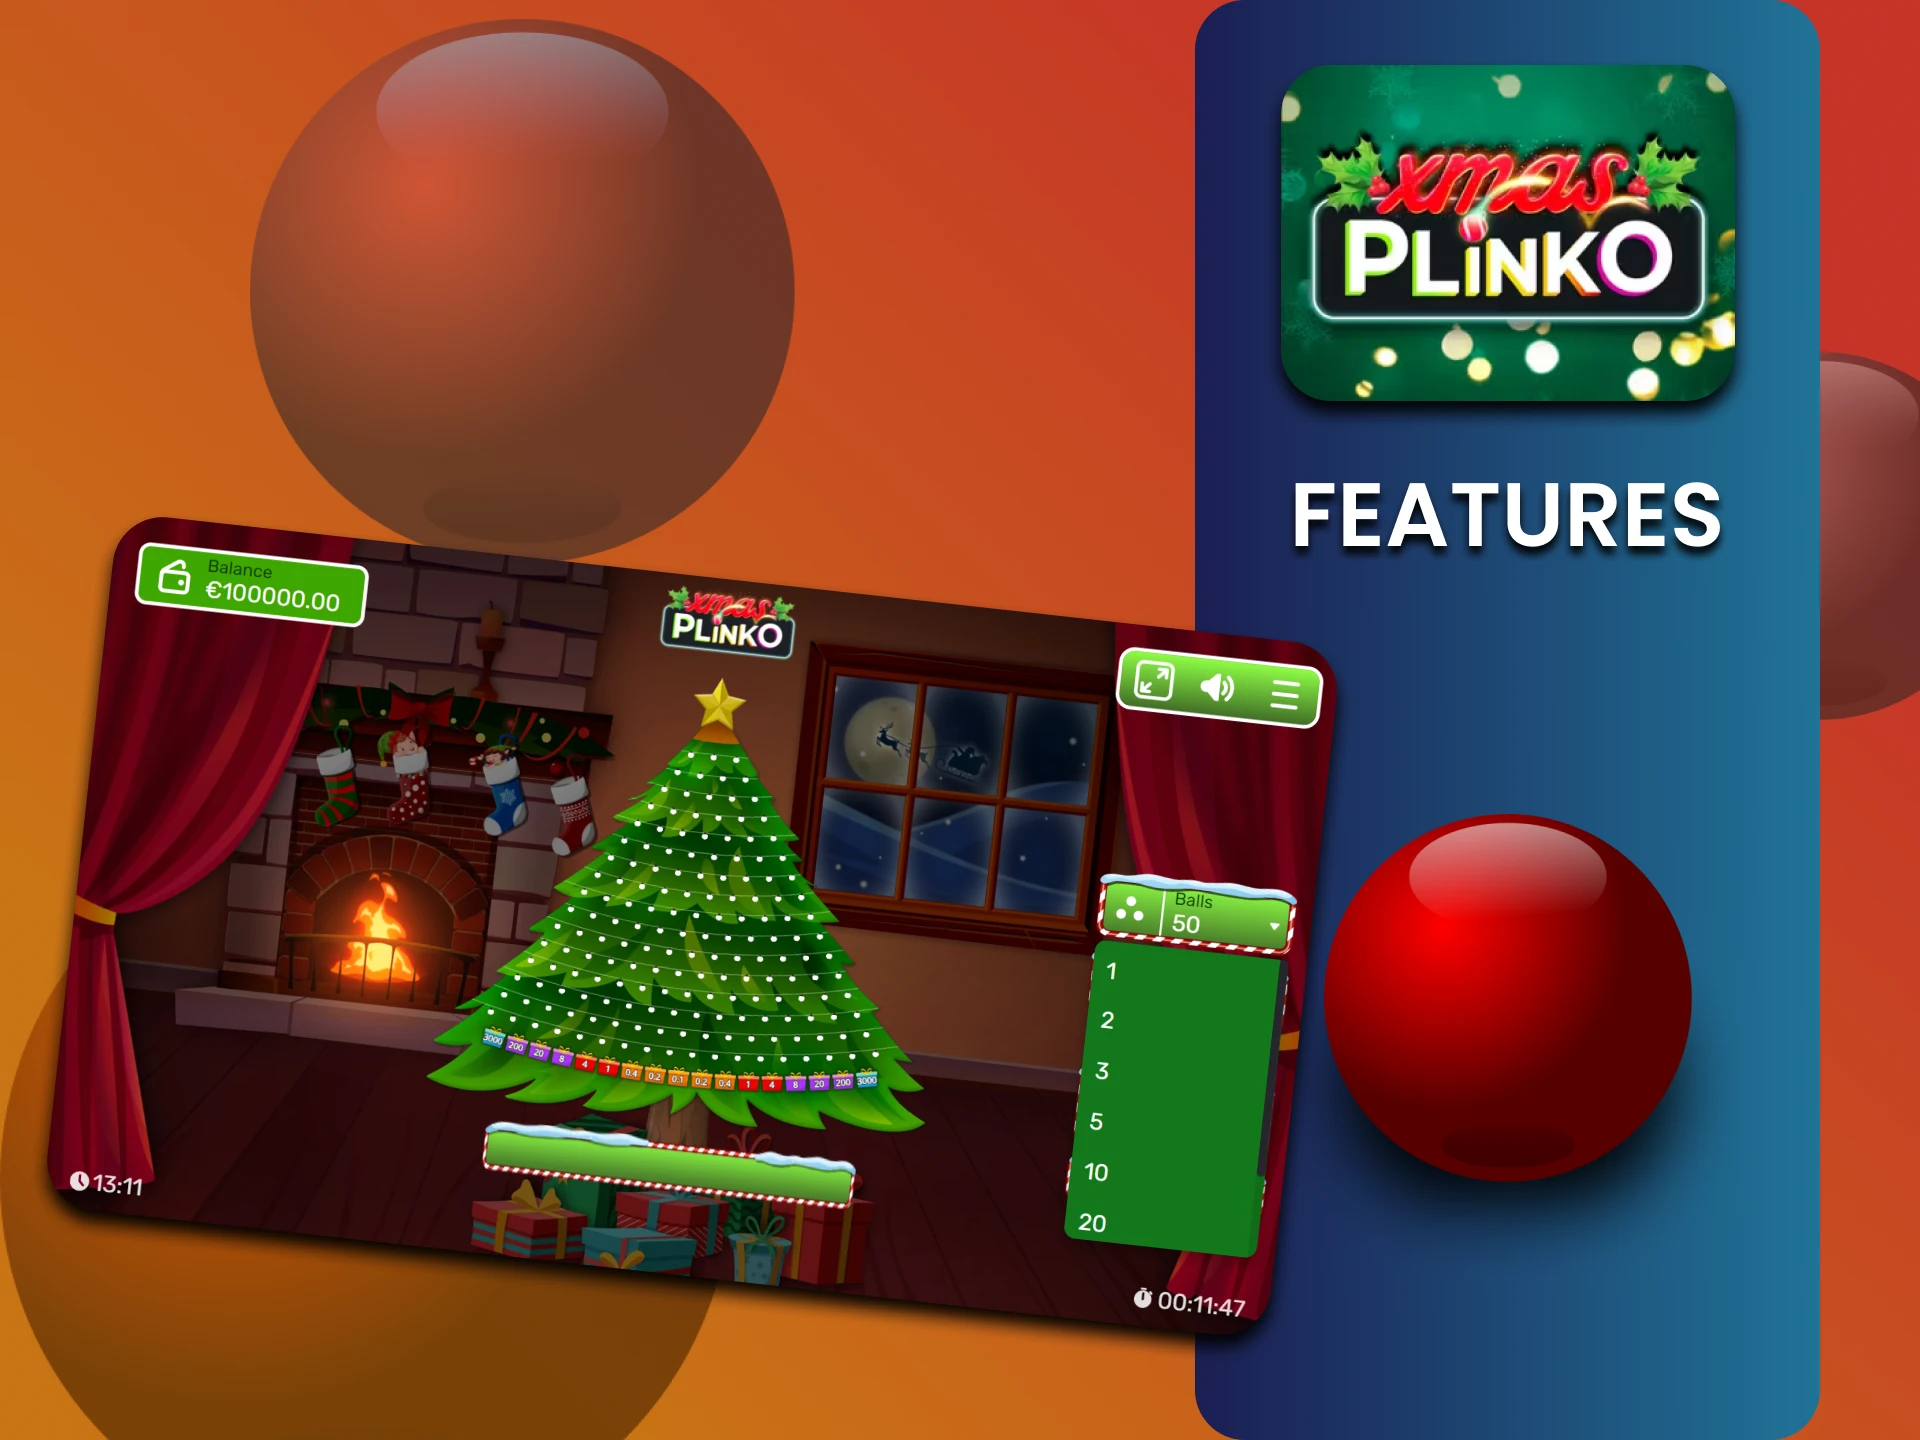 We will talk about the functionality of the Plinko Xmas game.